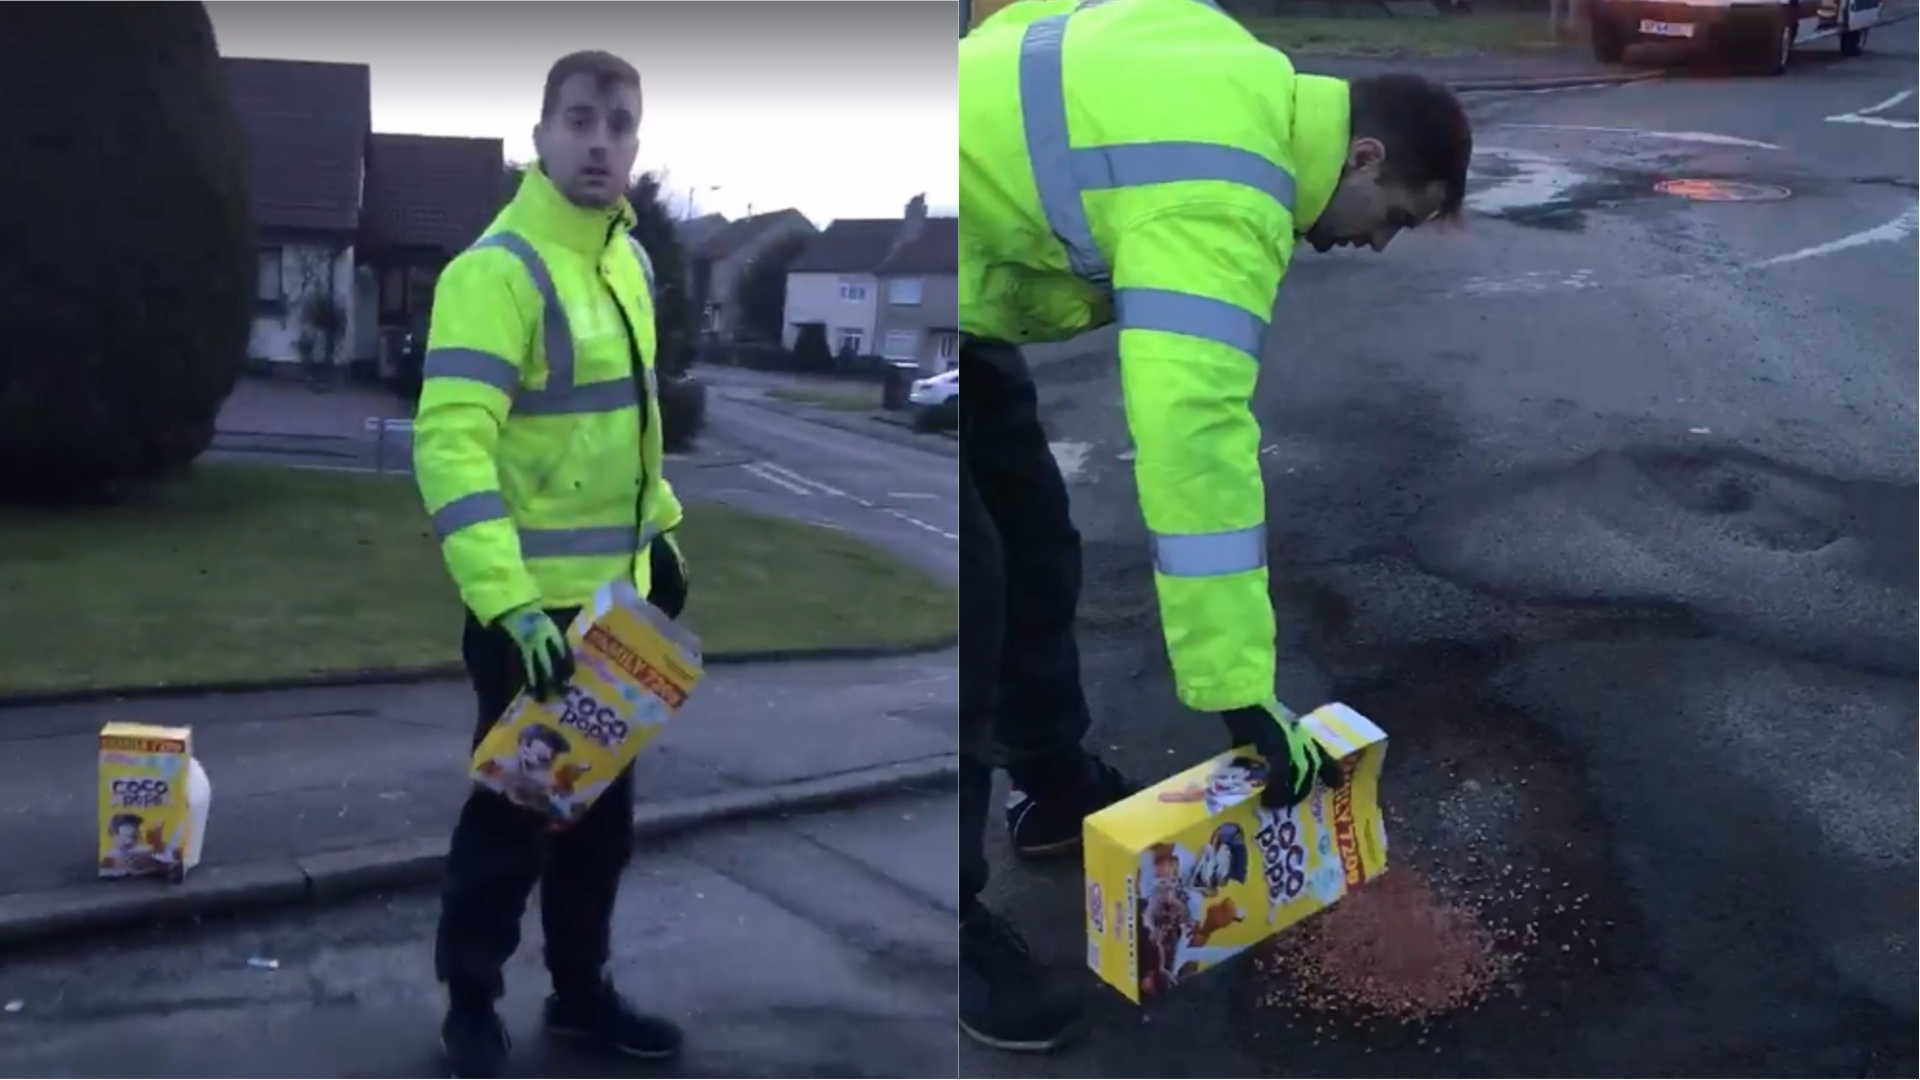 A satirical video shows a man filling potholes with Coco Pops